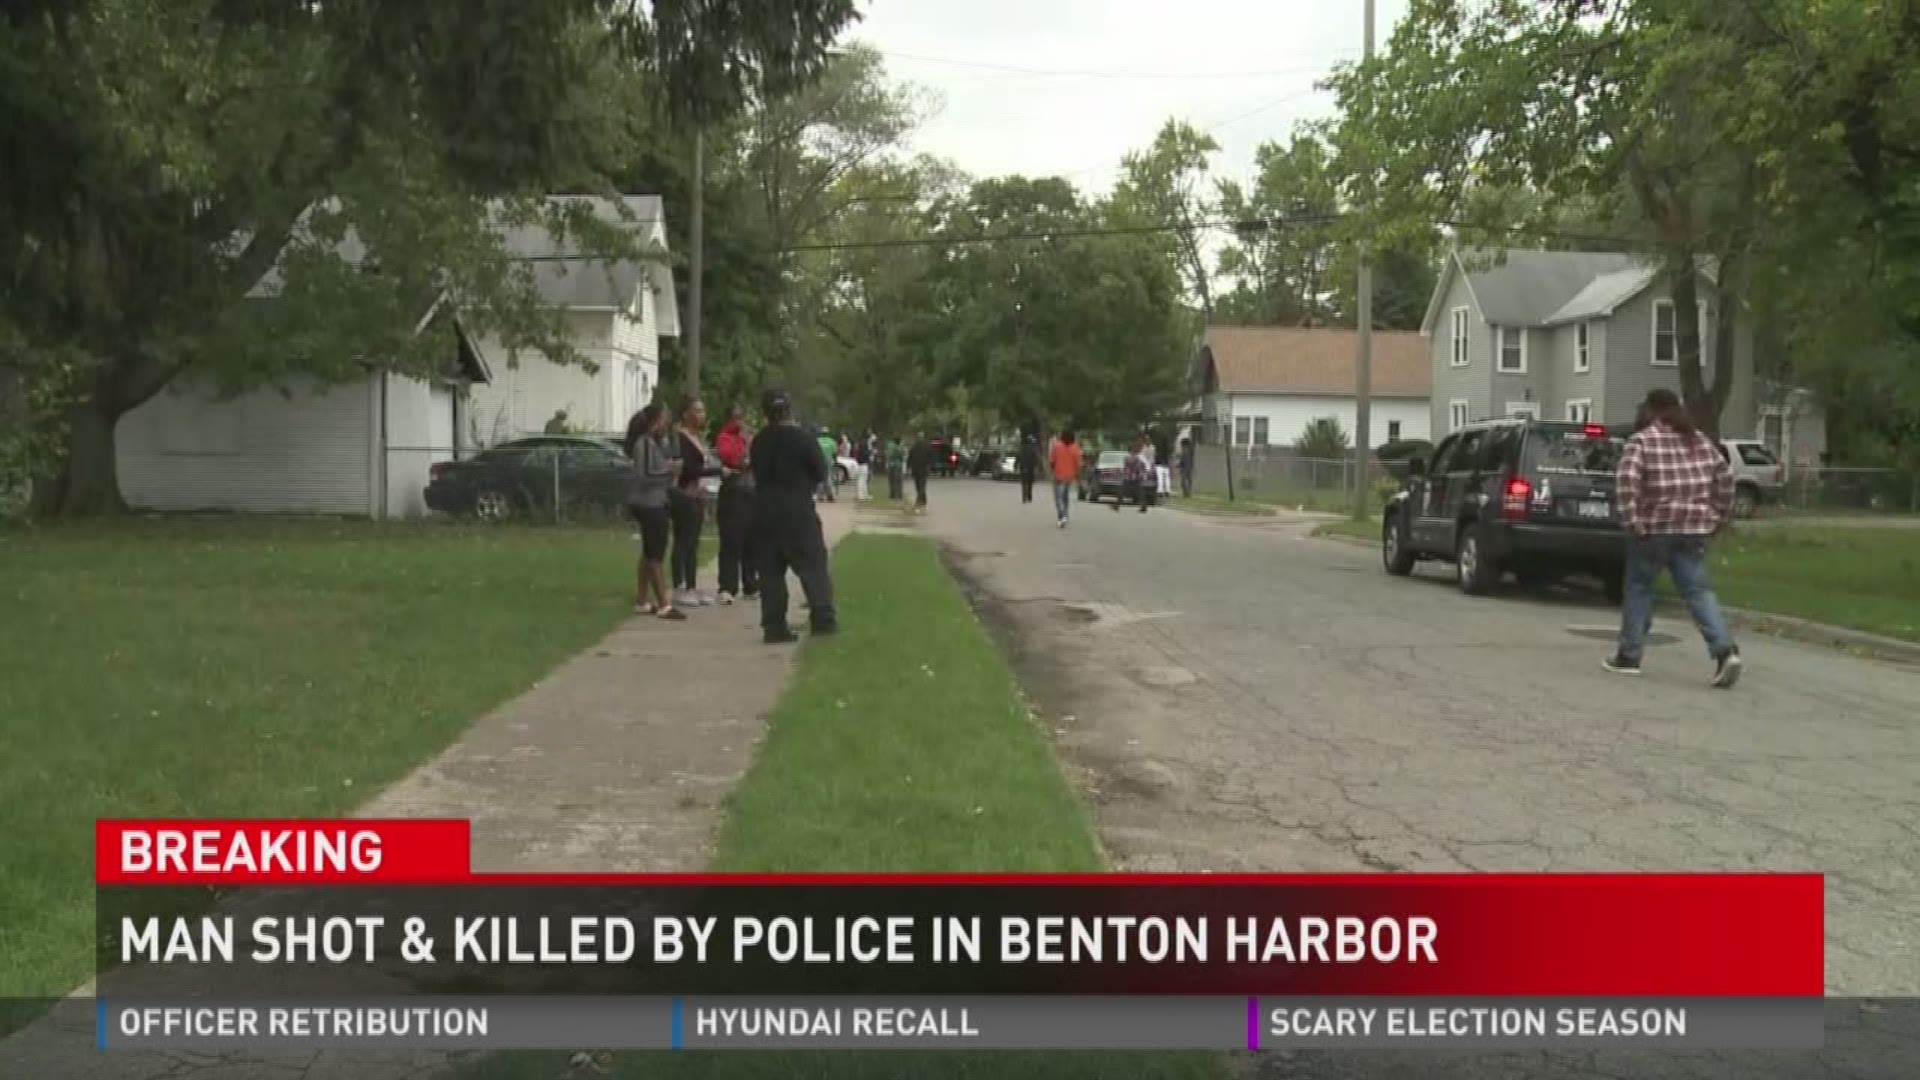 Man shot and killed by police in Benton Harbor (12:30 p.m., Oct. 18, 2016).